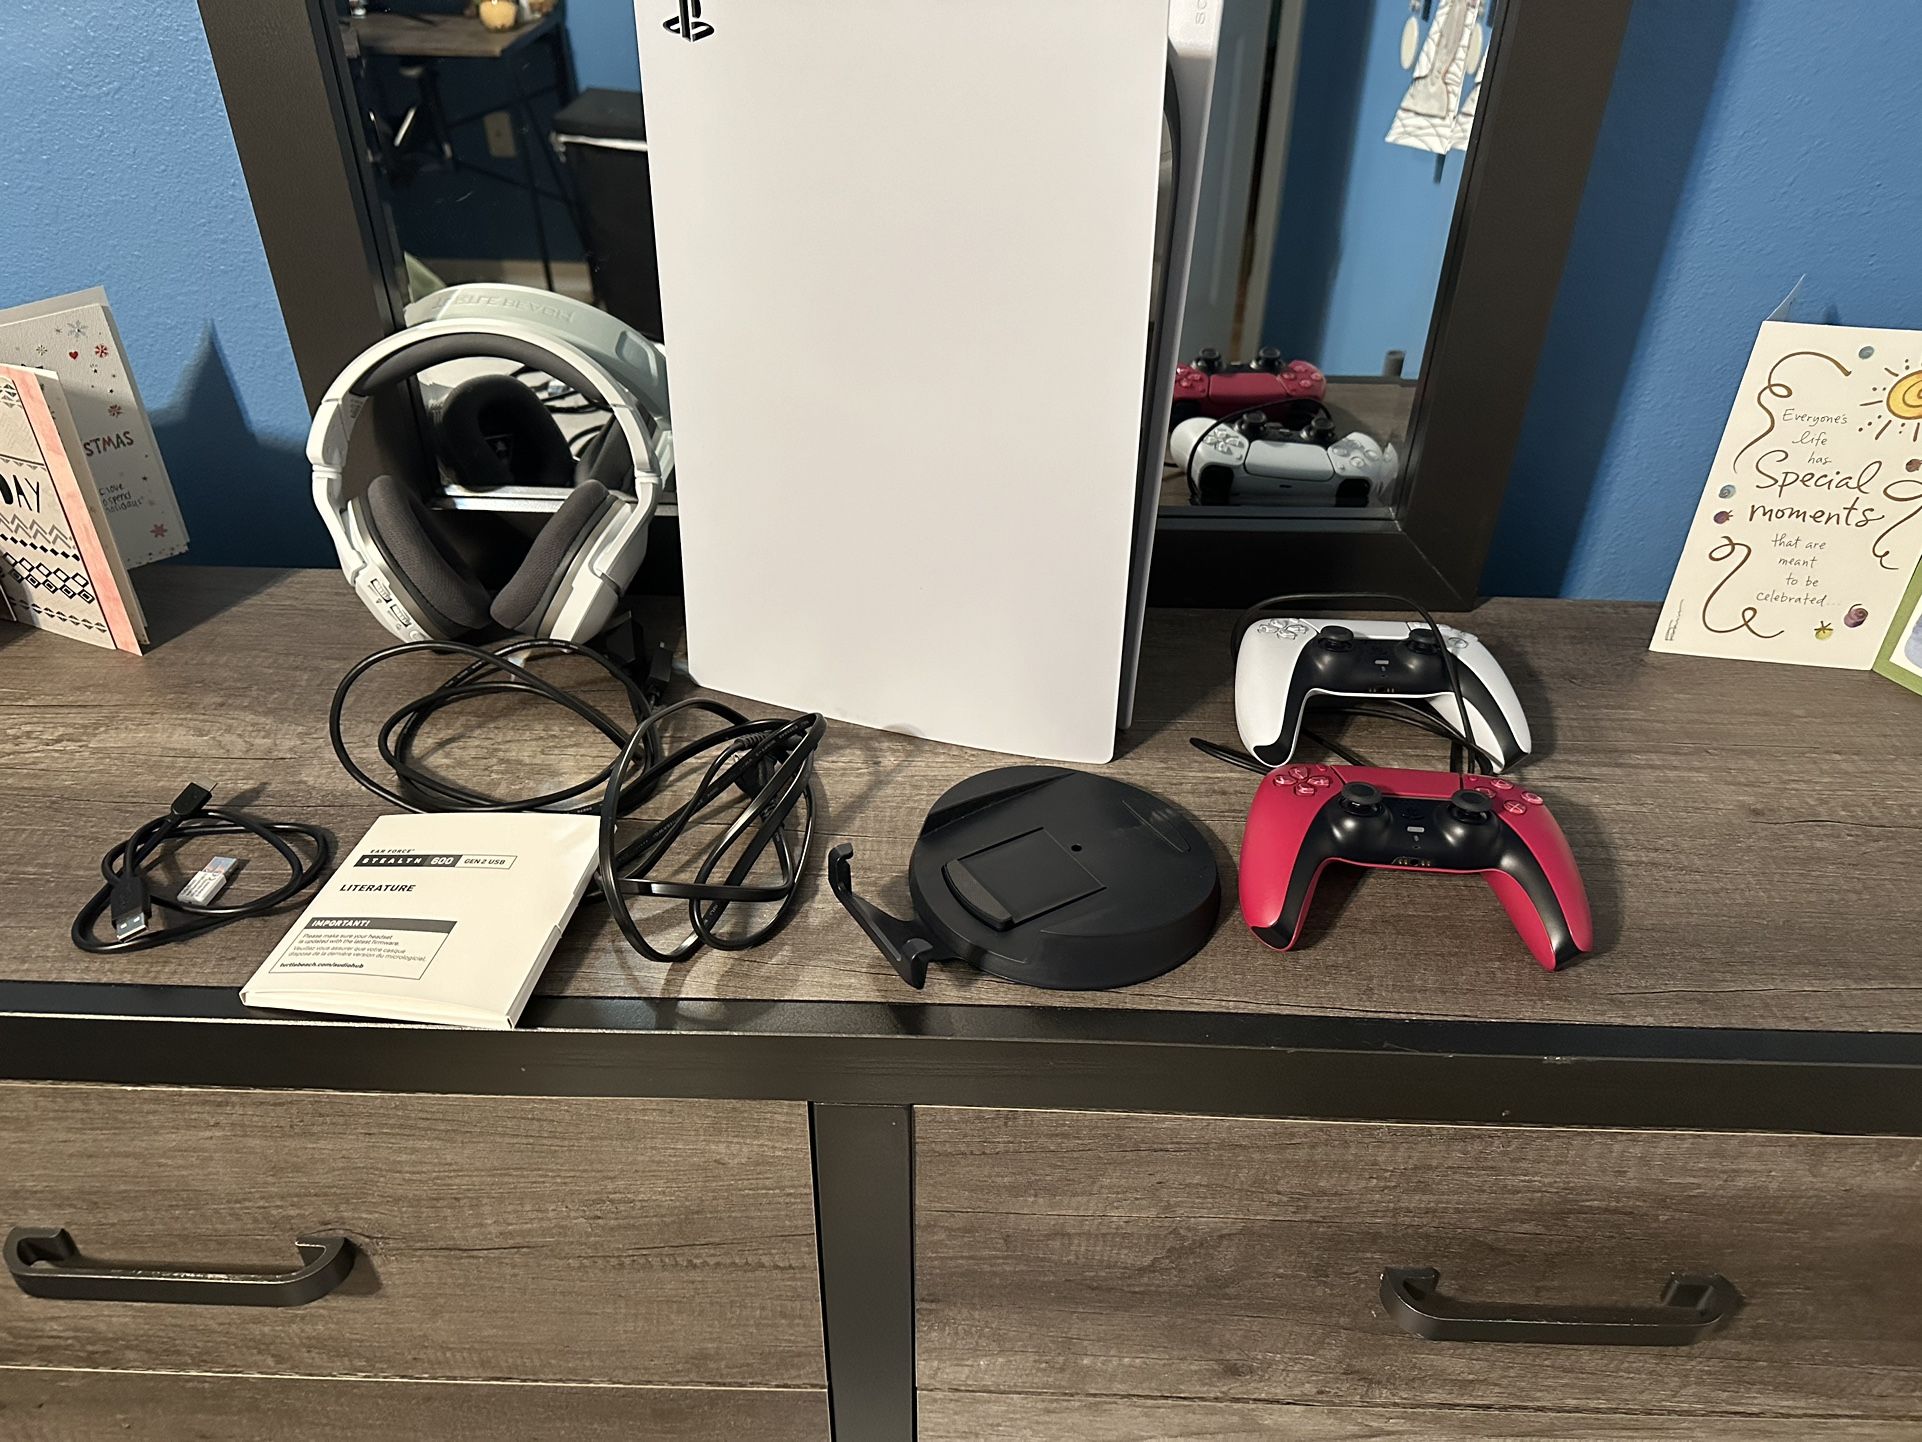 PlayStation 5 and Extras